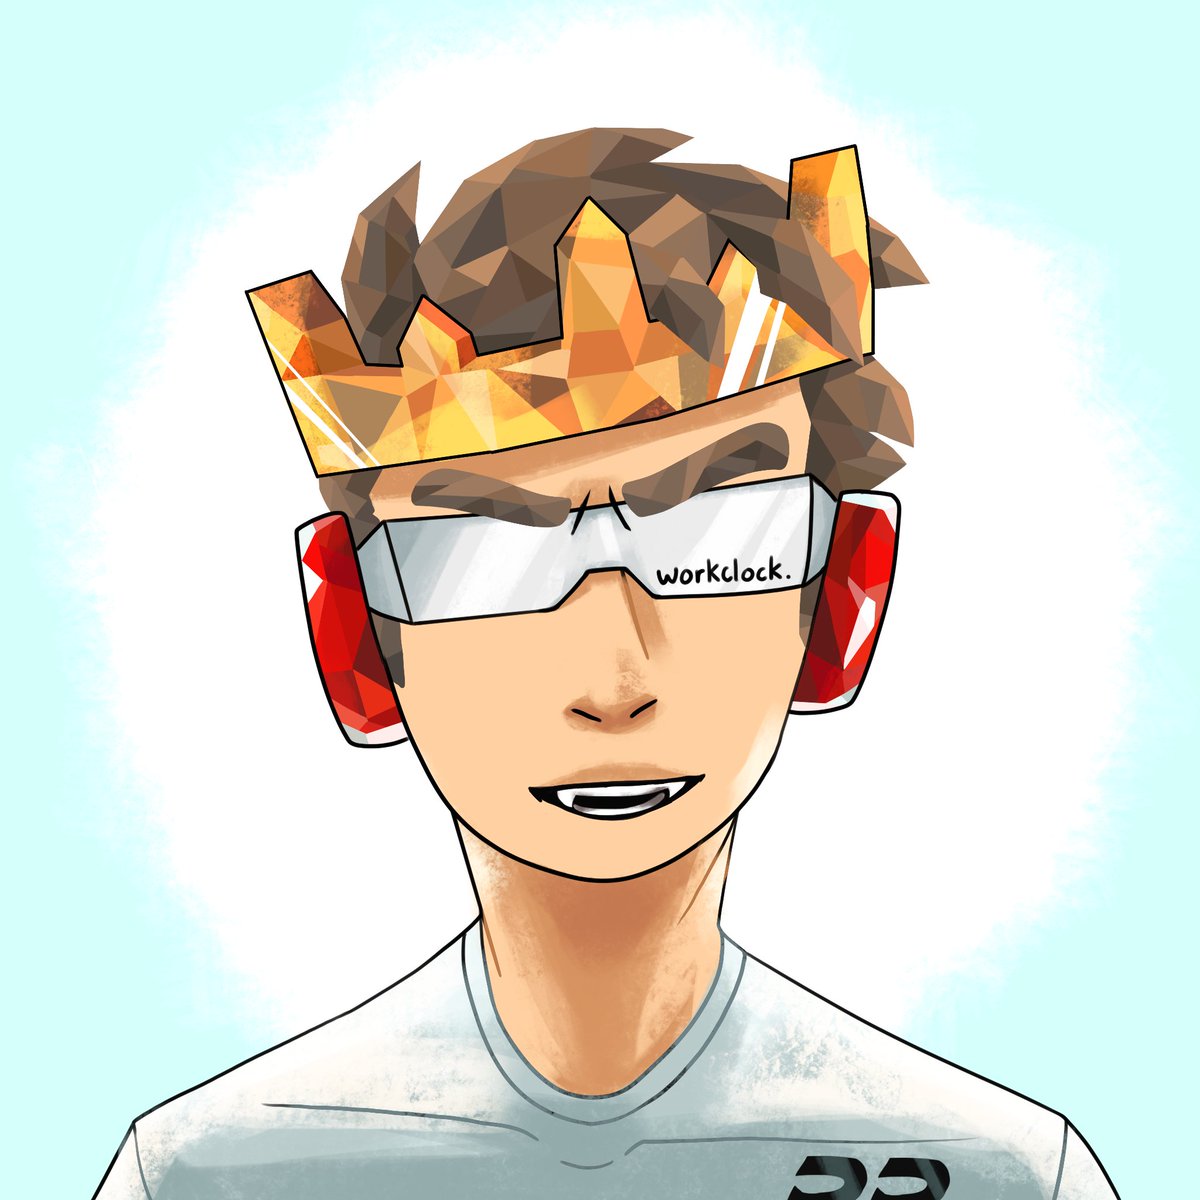 Platinum Productions On Twitter Thank You Mutantavacado For Drawing My Roblox Avatar Keep Up The Good Work Roblox Robloxdev - cool roblox avatar drawings